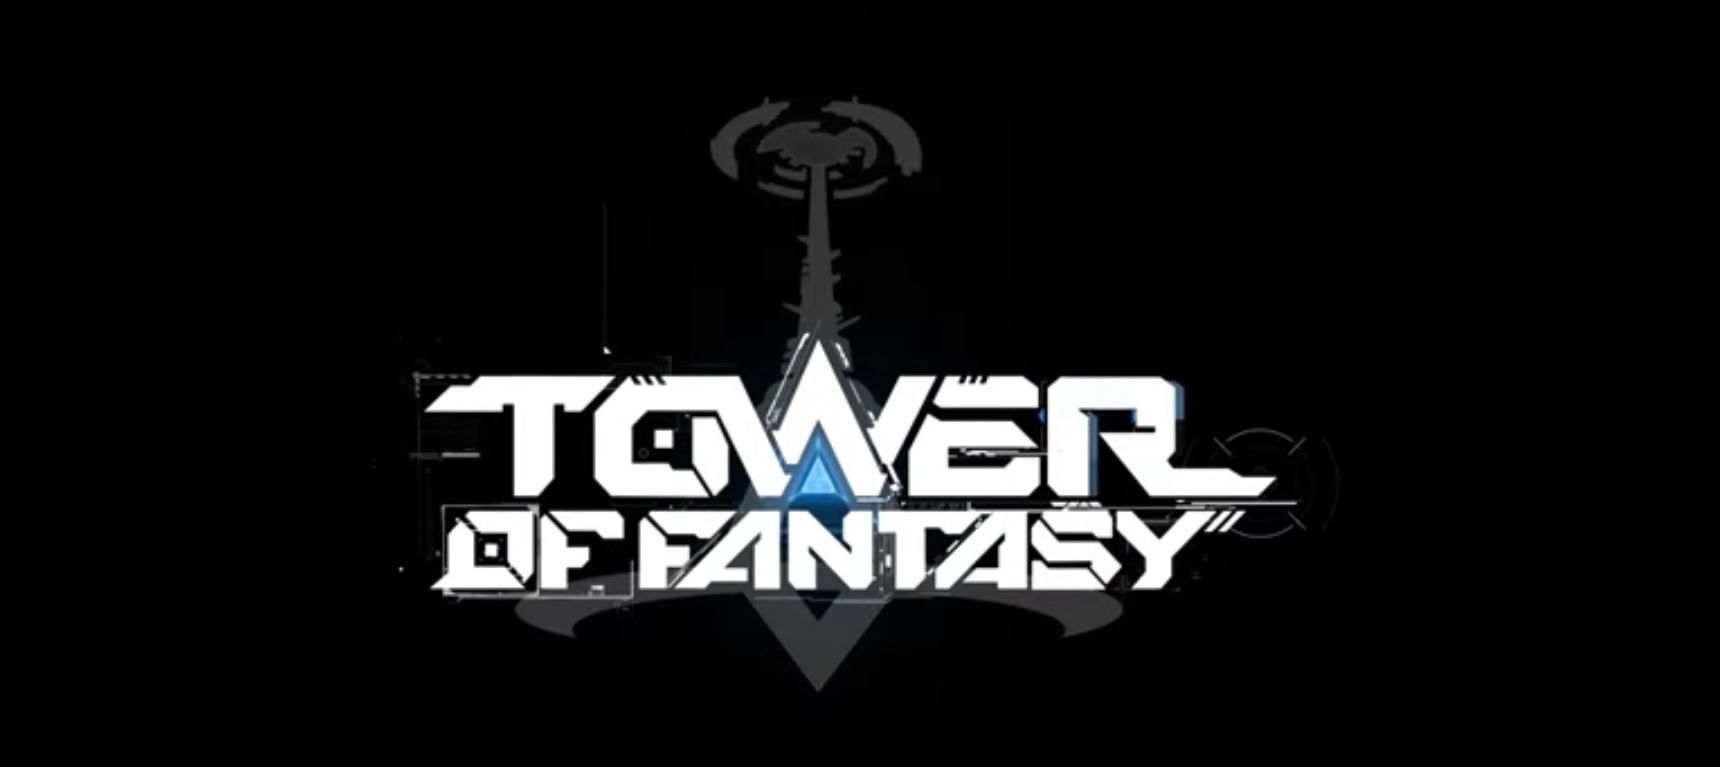 Tower of Fantasy si mostra nel nuovo Character Trailer